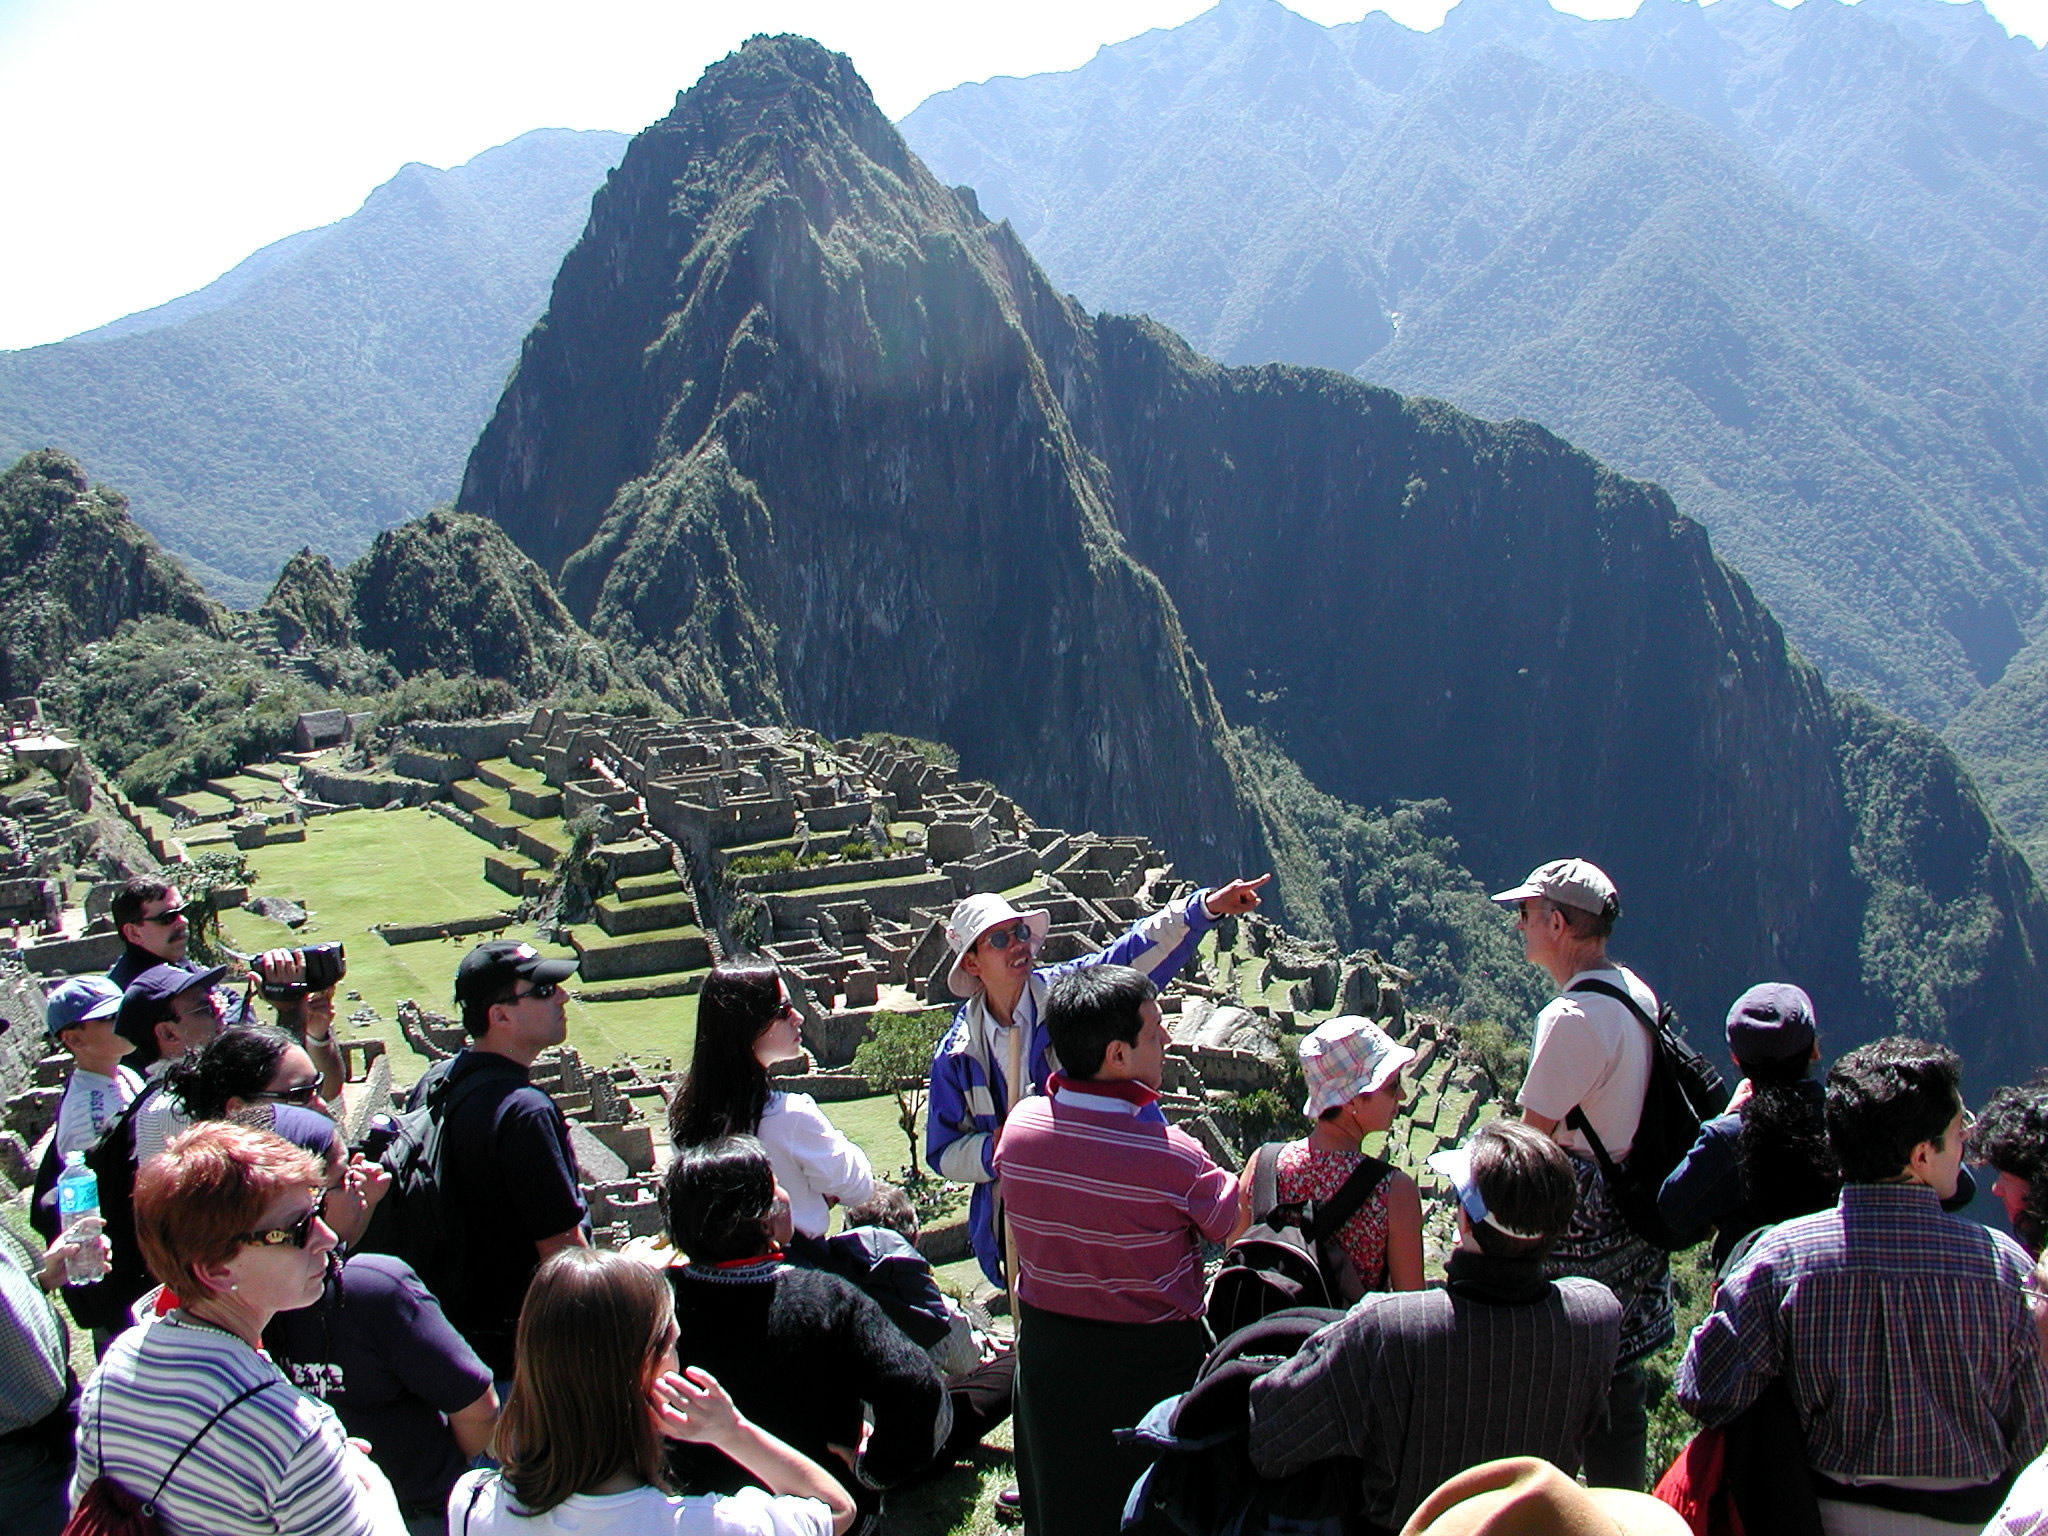 HOW TO HIRE A GUIDE FOR MACHU PICCHU